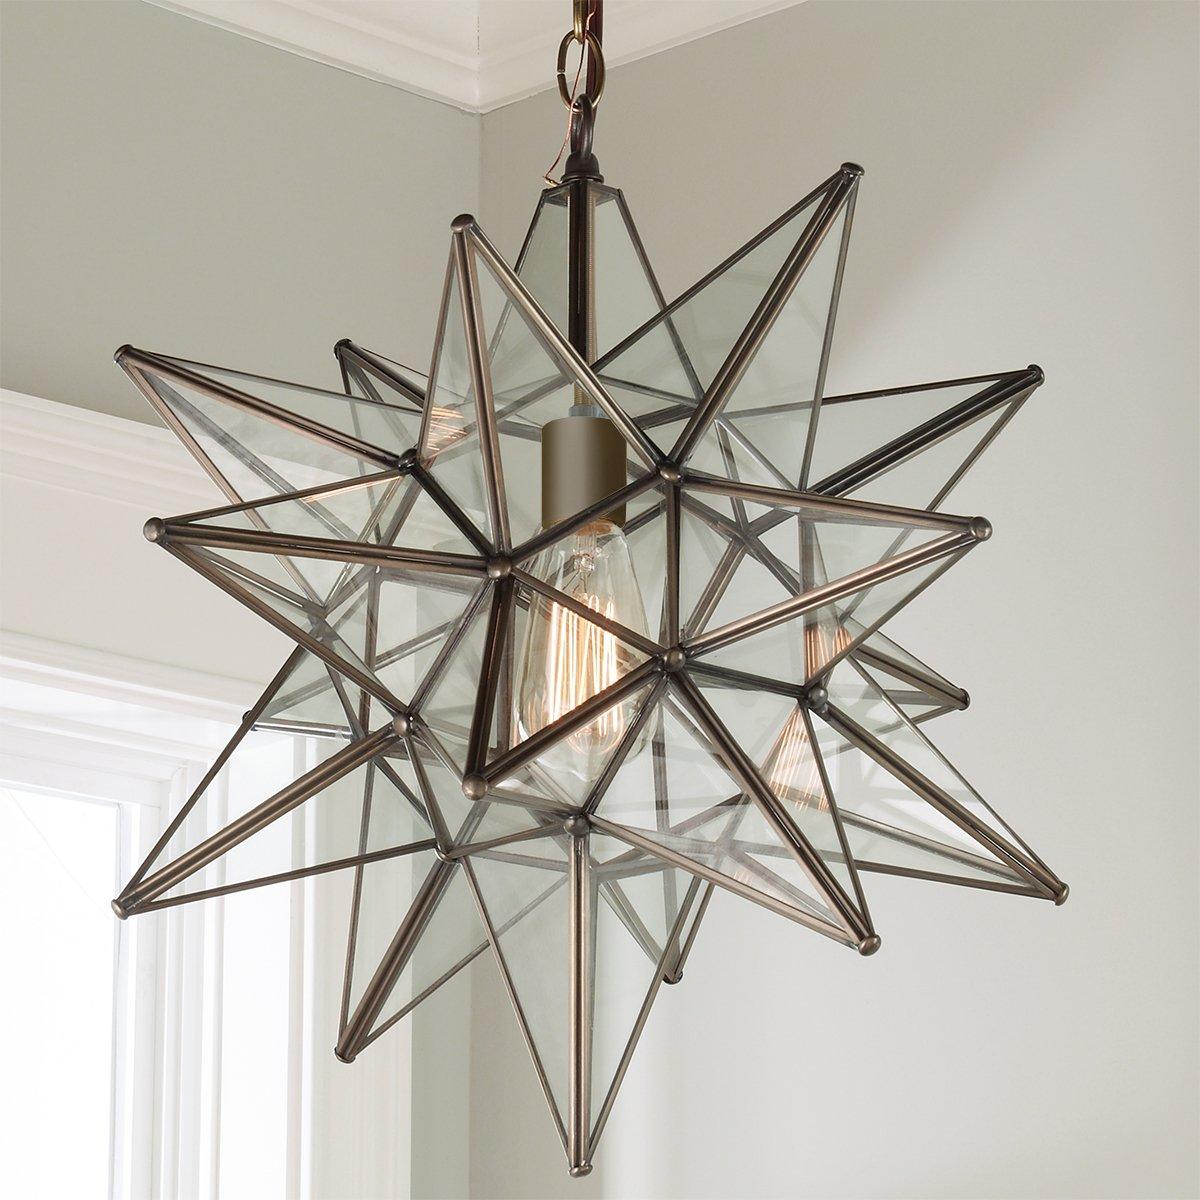 Tin Moravian Star Pendant Light – Medium  Handcrafted Lighting Solutions  in Glass and Recycled Tin For Home or Office